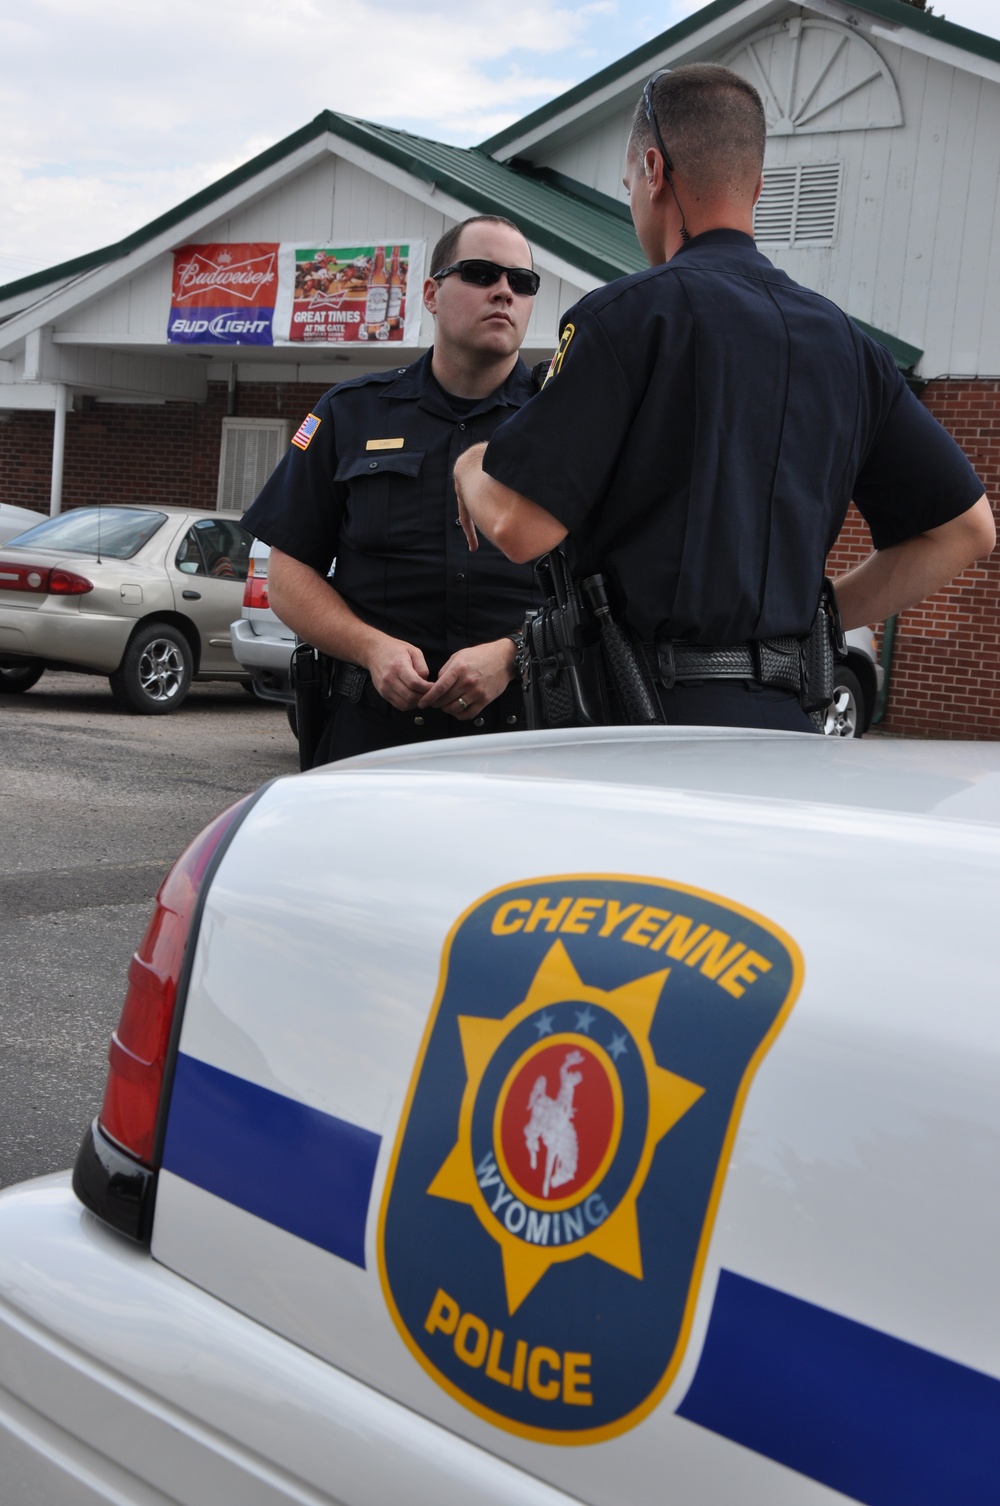 Cheyenne Police foster culture of military service